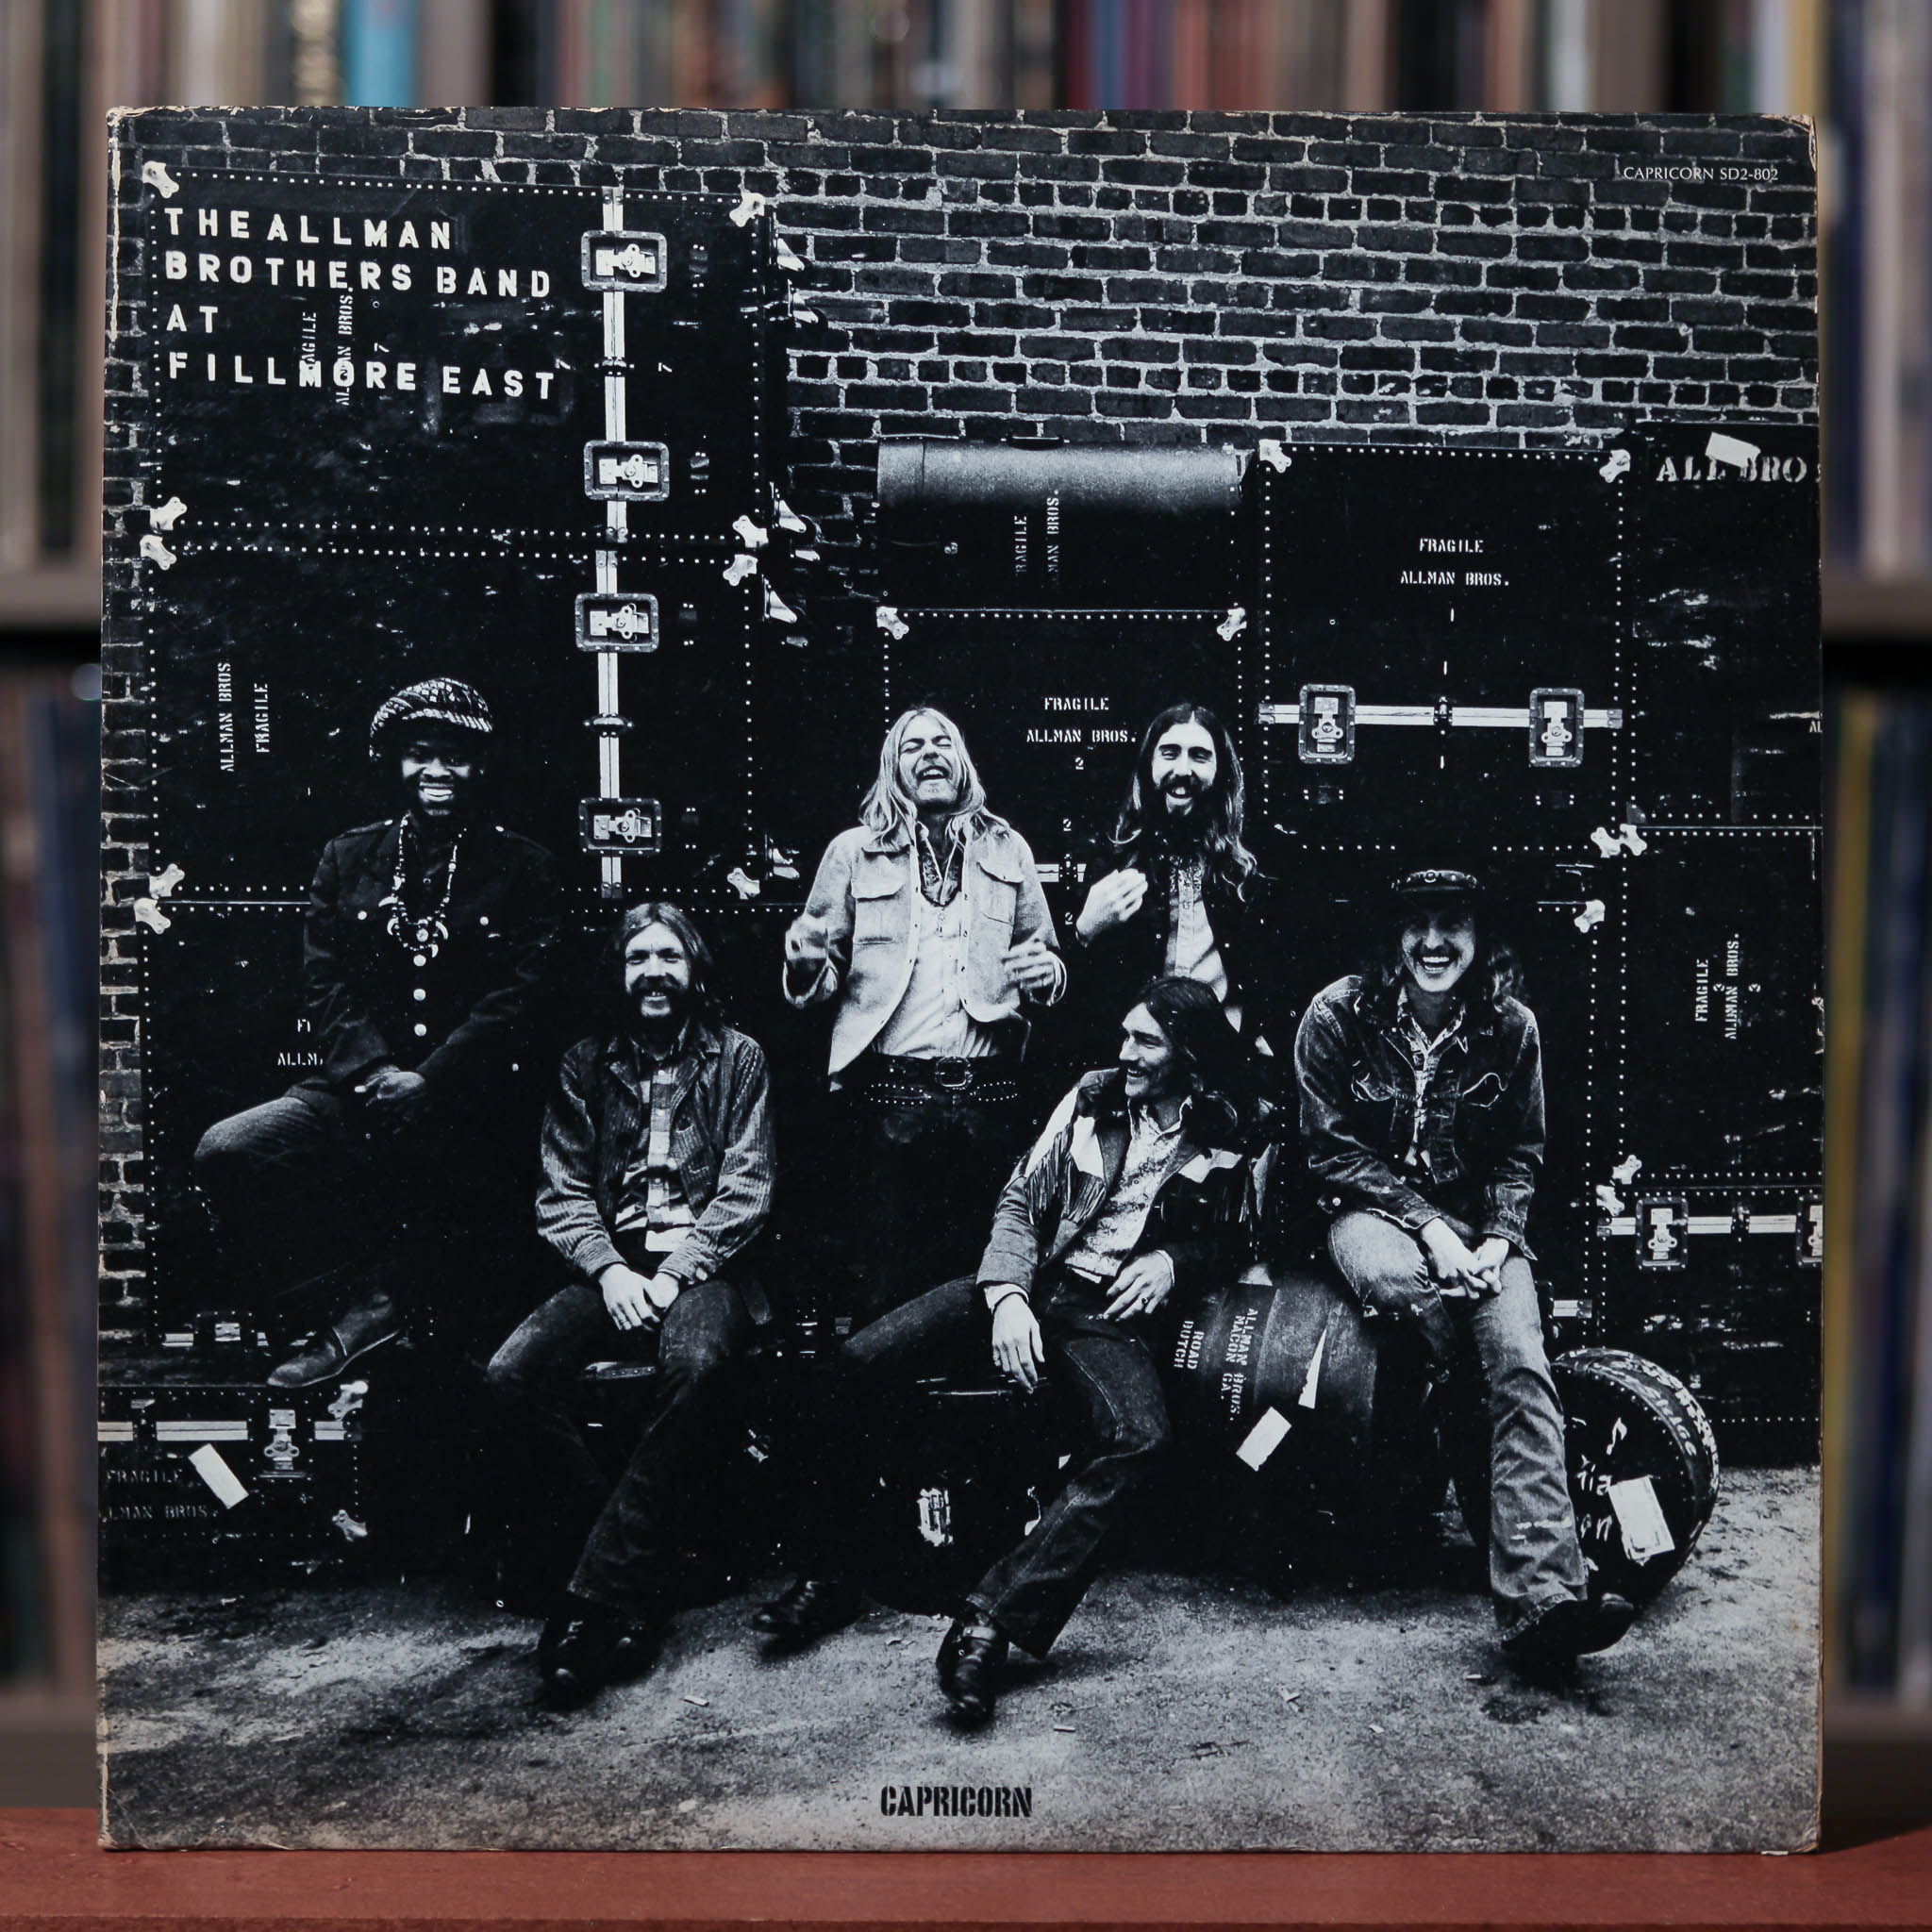 Allman Brothers - The Allman Brothers Band At Fillmore East - 2LP - 19